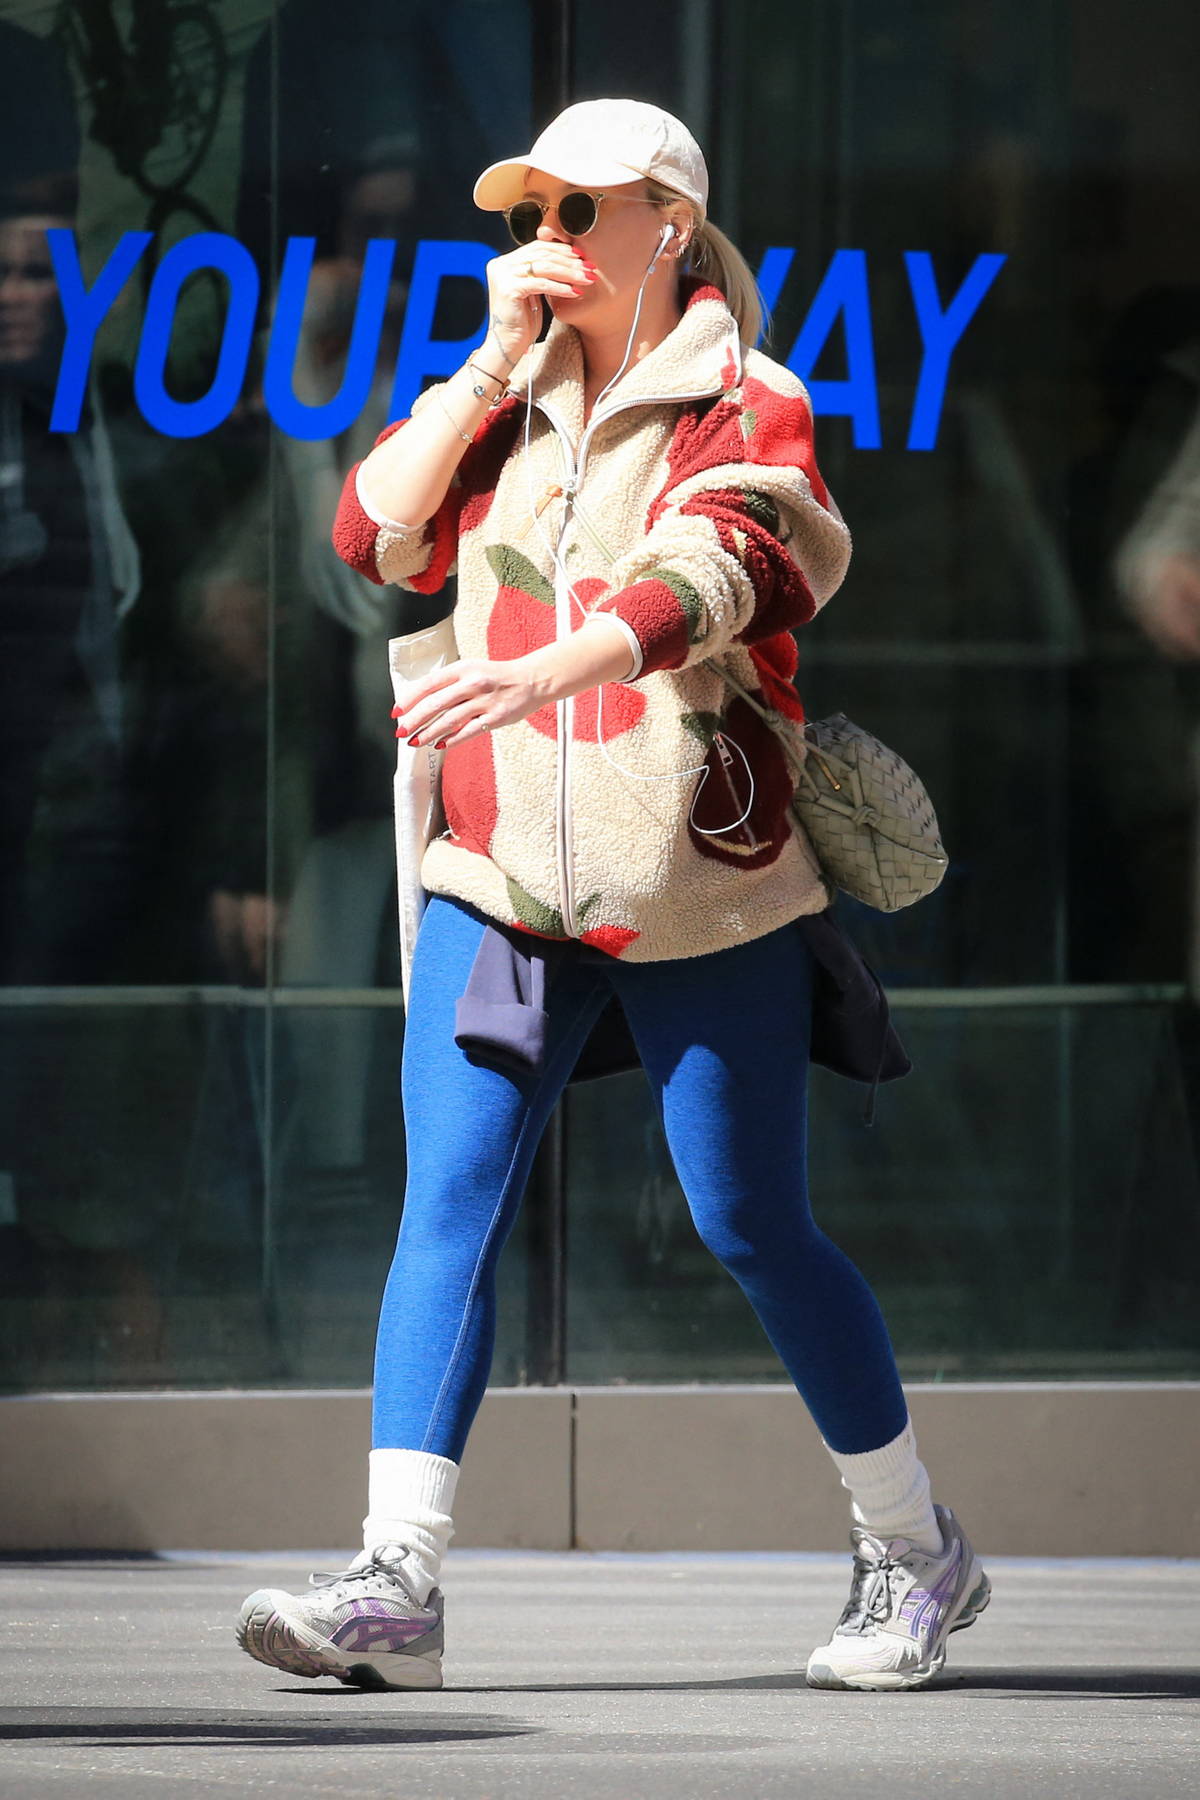 Scarlett Johansson keeps it casual in a colorful fleece and blue